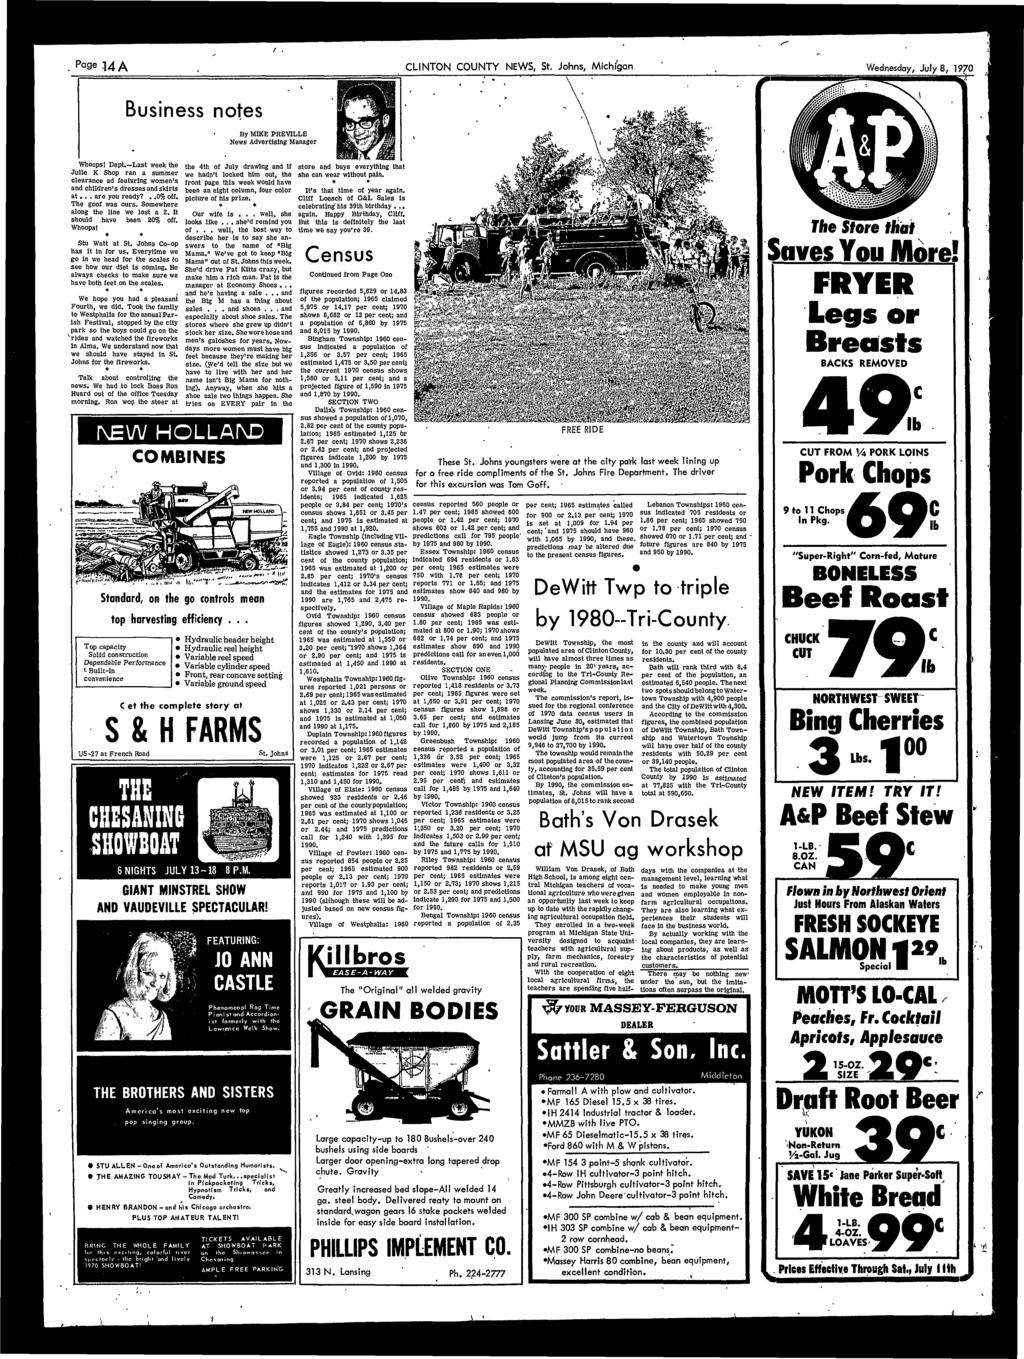 Page A CLINTON COUNTY NEWS, St. Johns, Mchgan Wednesday, July, 970 Busness notes By MIKE PREVILLE News Advertsng Manager Whoops I Dept.